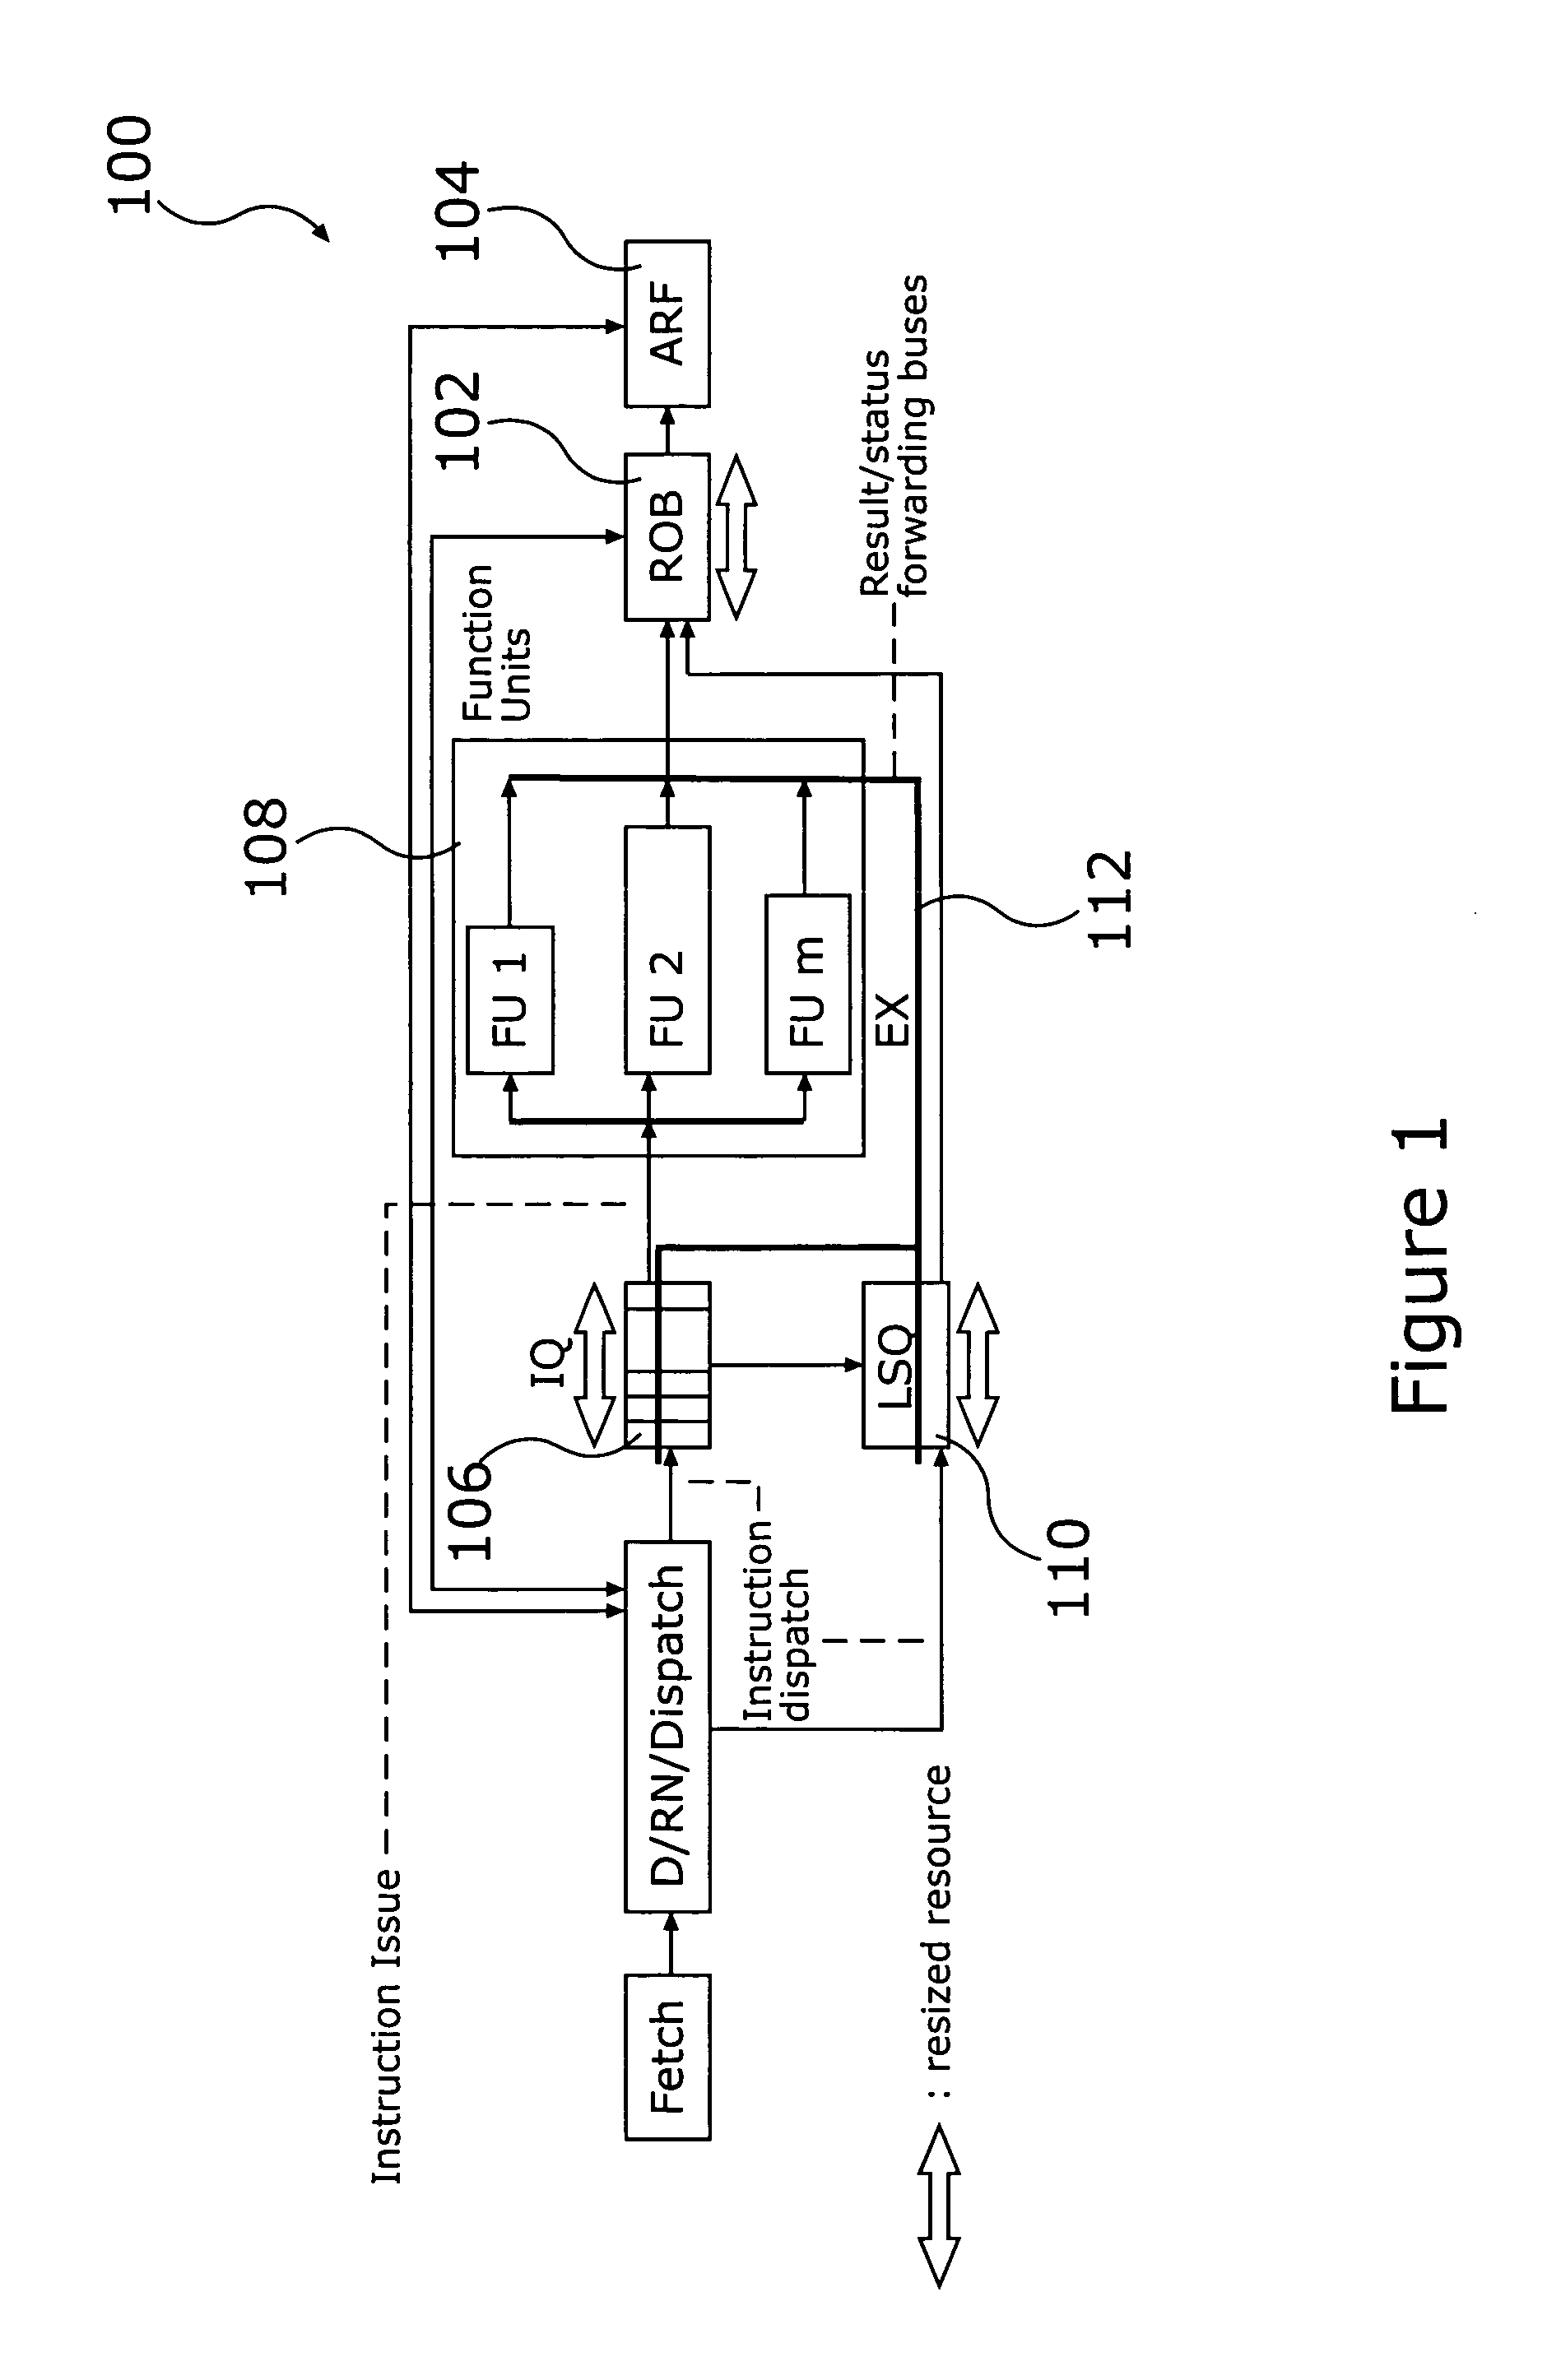 System and method for reducing power requirements of microprocessors through dynamic allocation of datapath resources